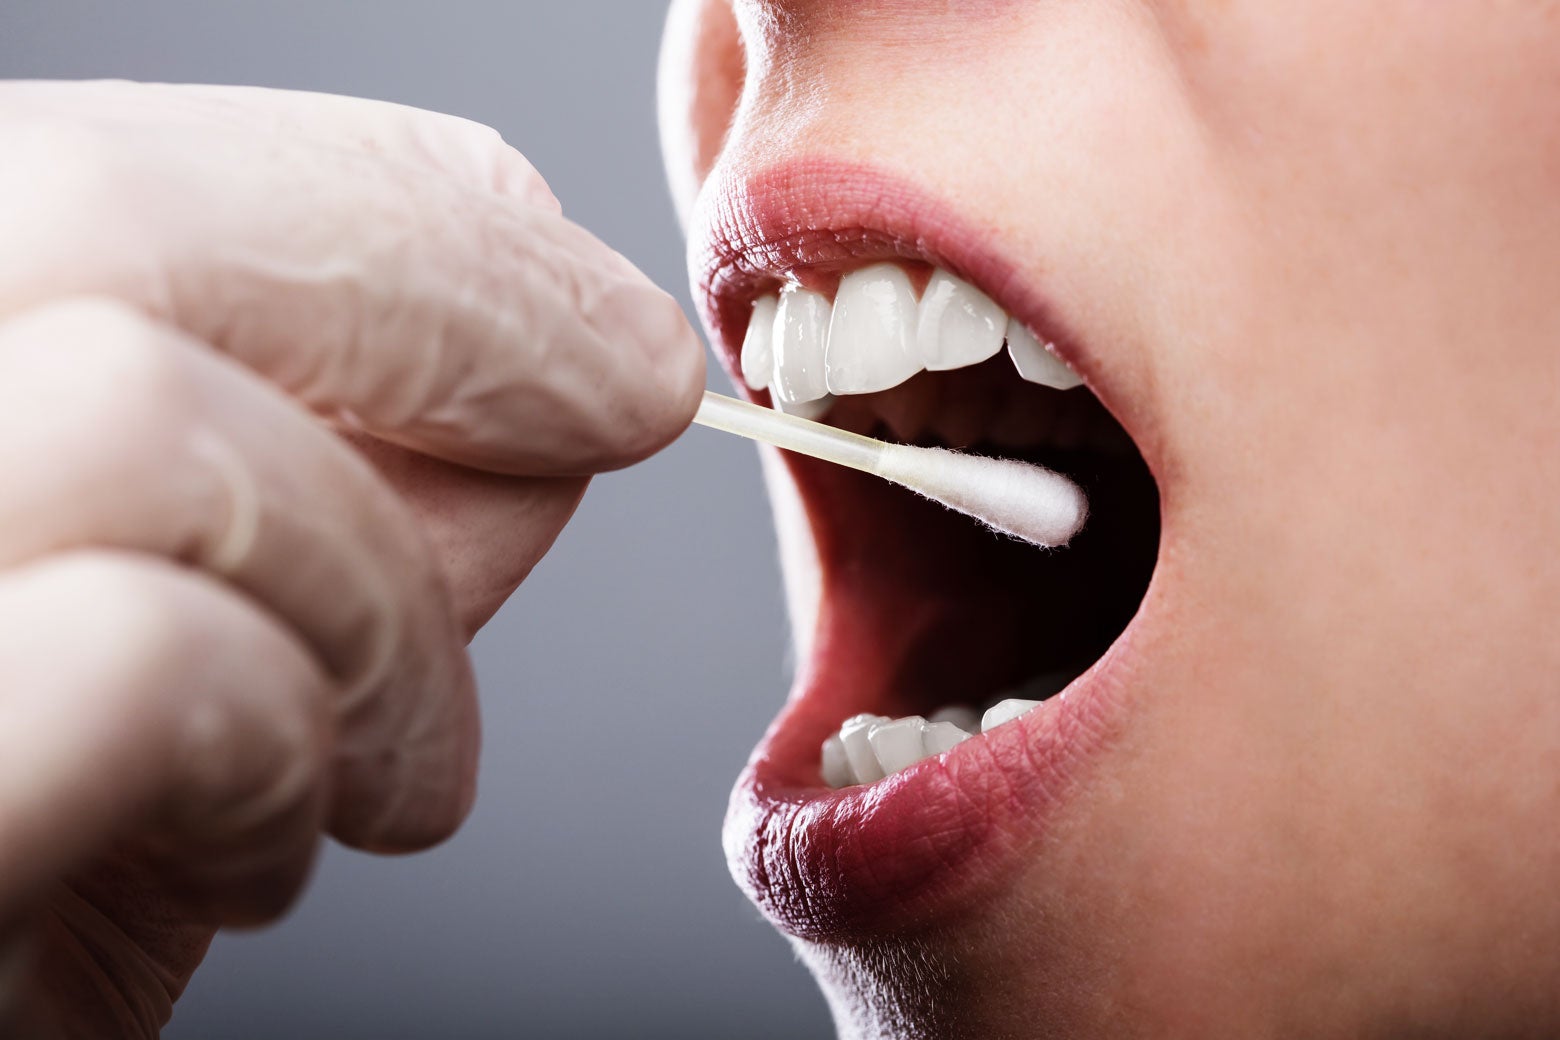 Stock image of a gloved hand directing a cotton swab into a person's open mouth for a DNA swab.